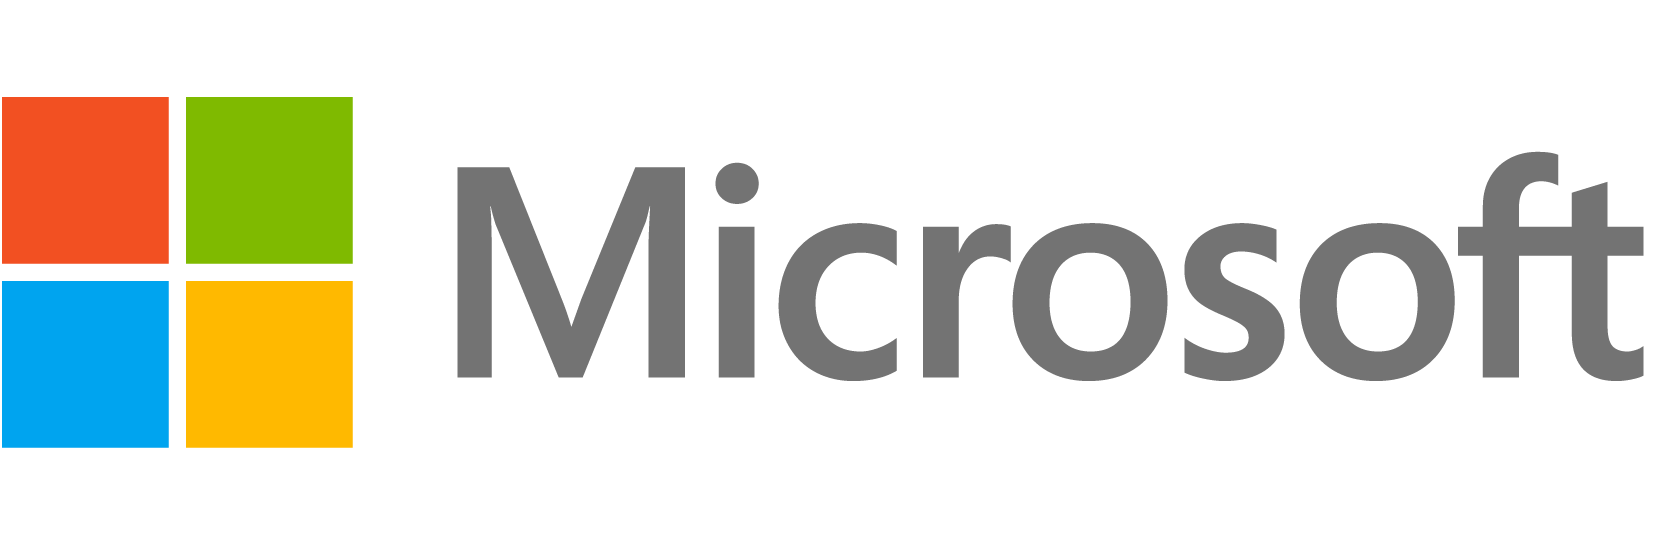 Microsoft ranked 1 in the list of Top 10 Largest IT and Software Development Companies in the World (2019)